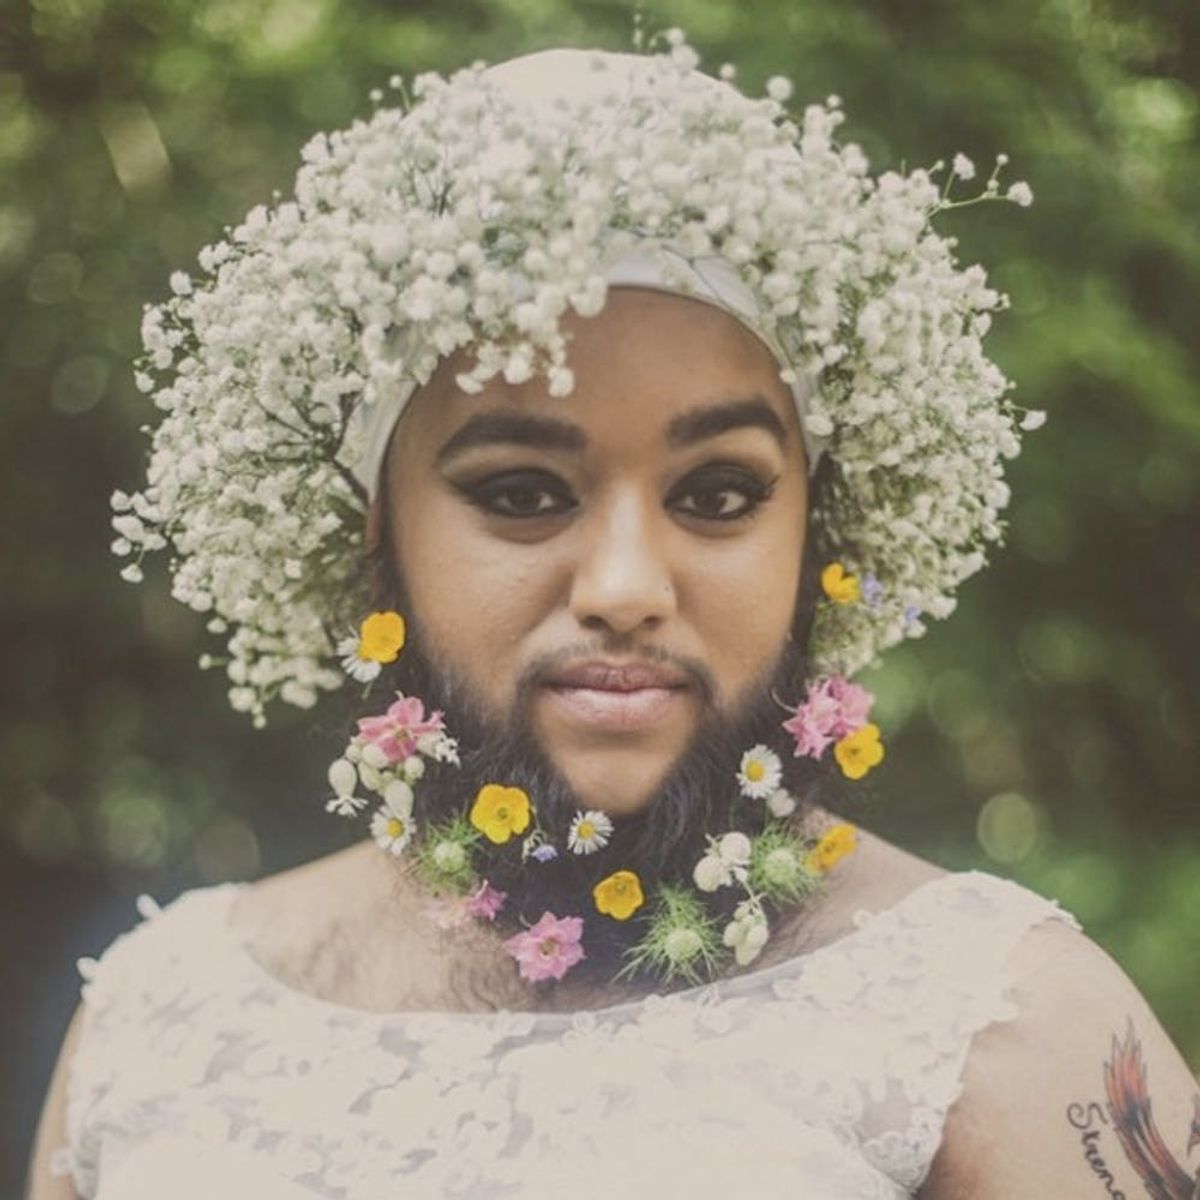 What These Stunning Unconventional Bride Pictures Teach Us About Self Love